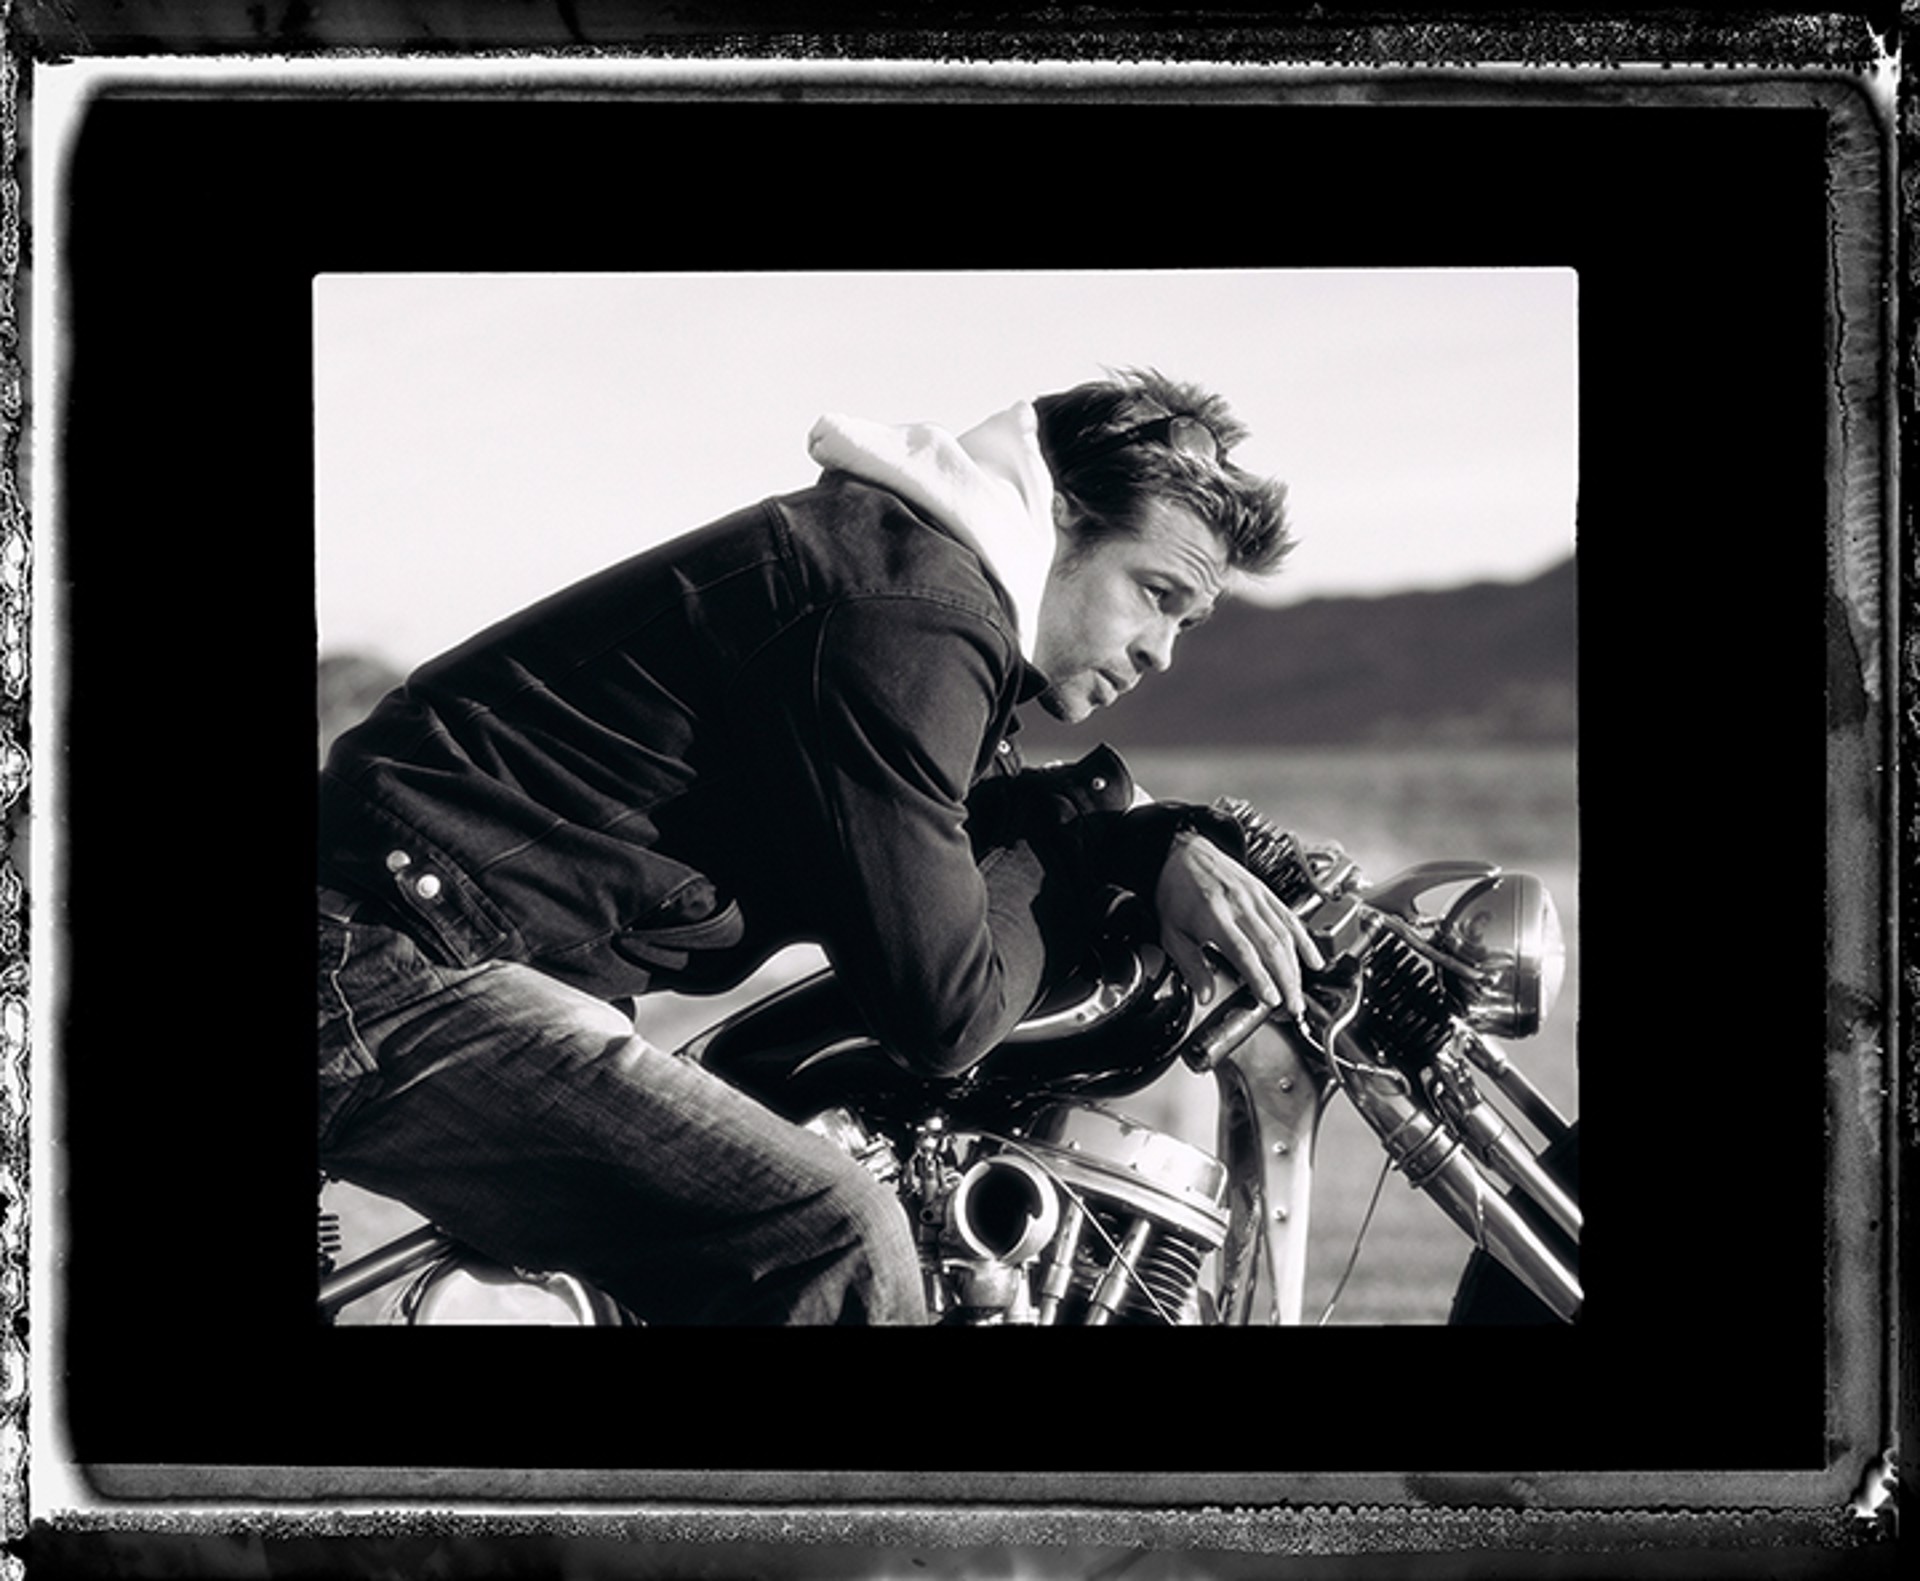 05009 Brad Pitt on Motorcycle Tilted Face BW by Timothy White